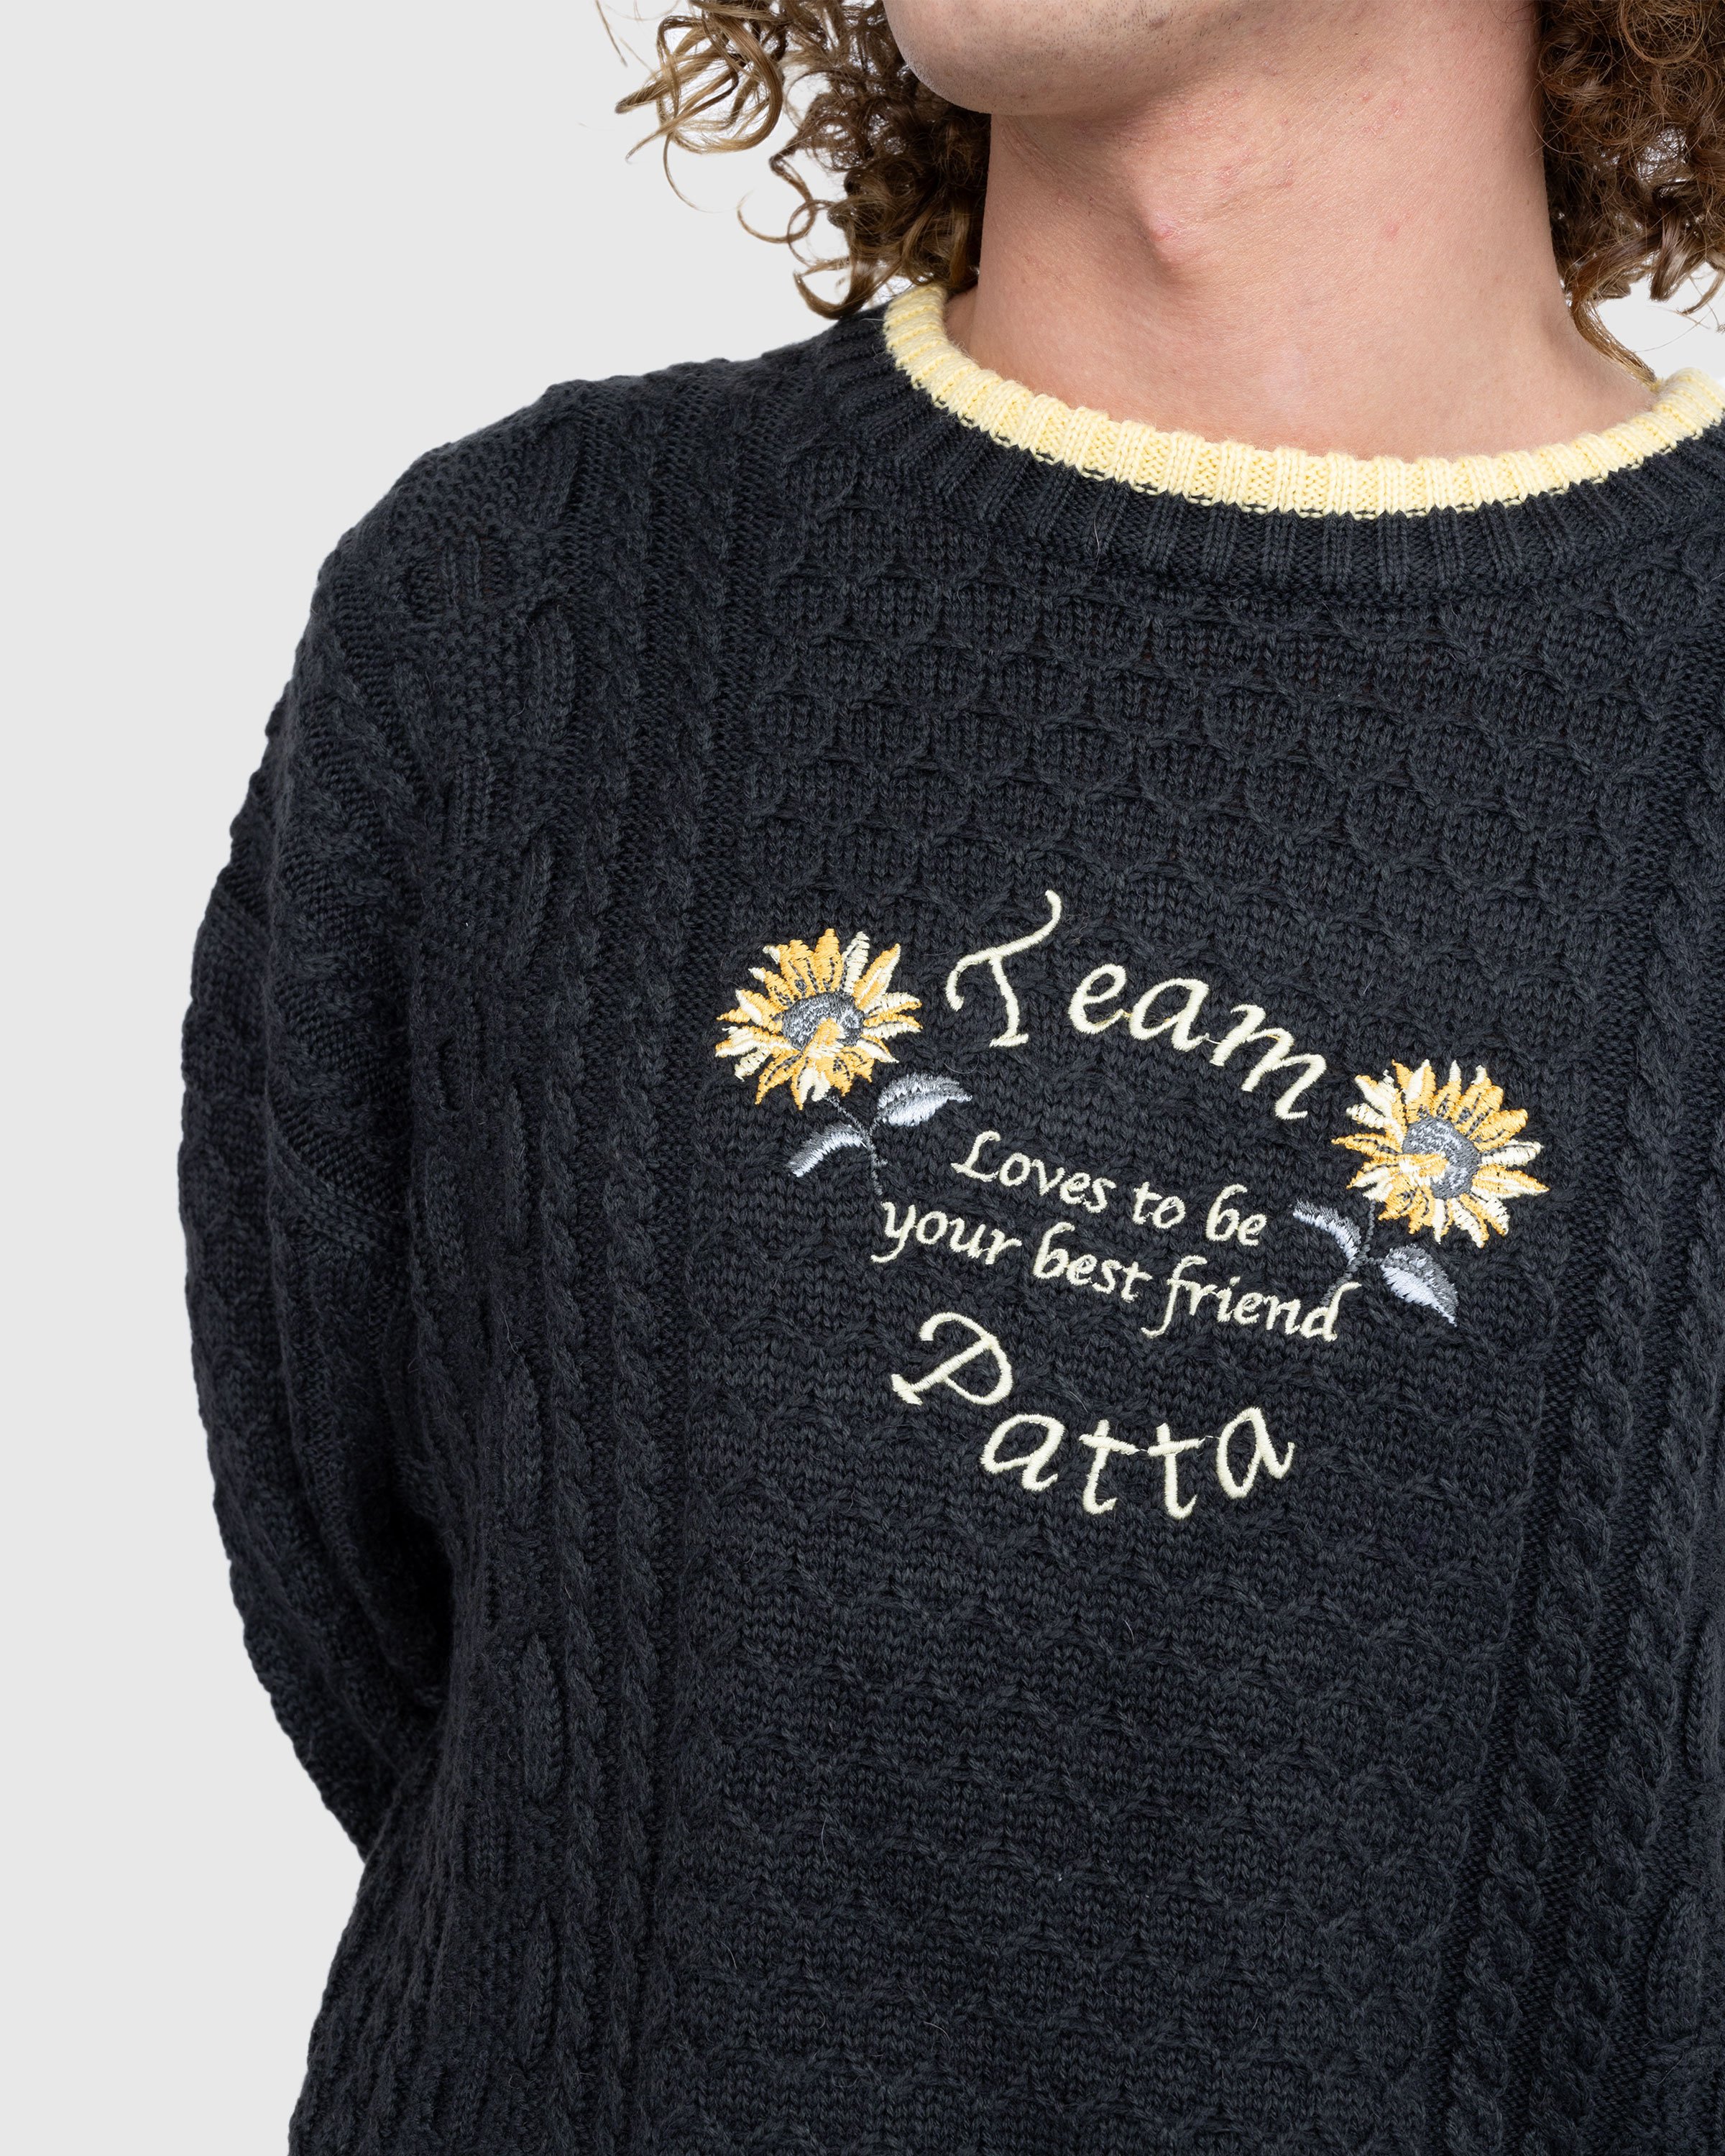 Patta - LOVES YOU CABLE KNITTED SWEATER Black - Clothing - Black - Image 5